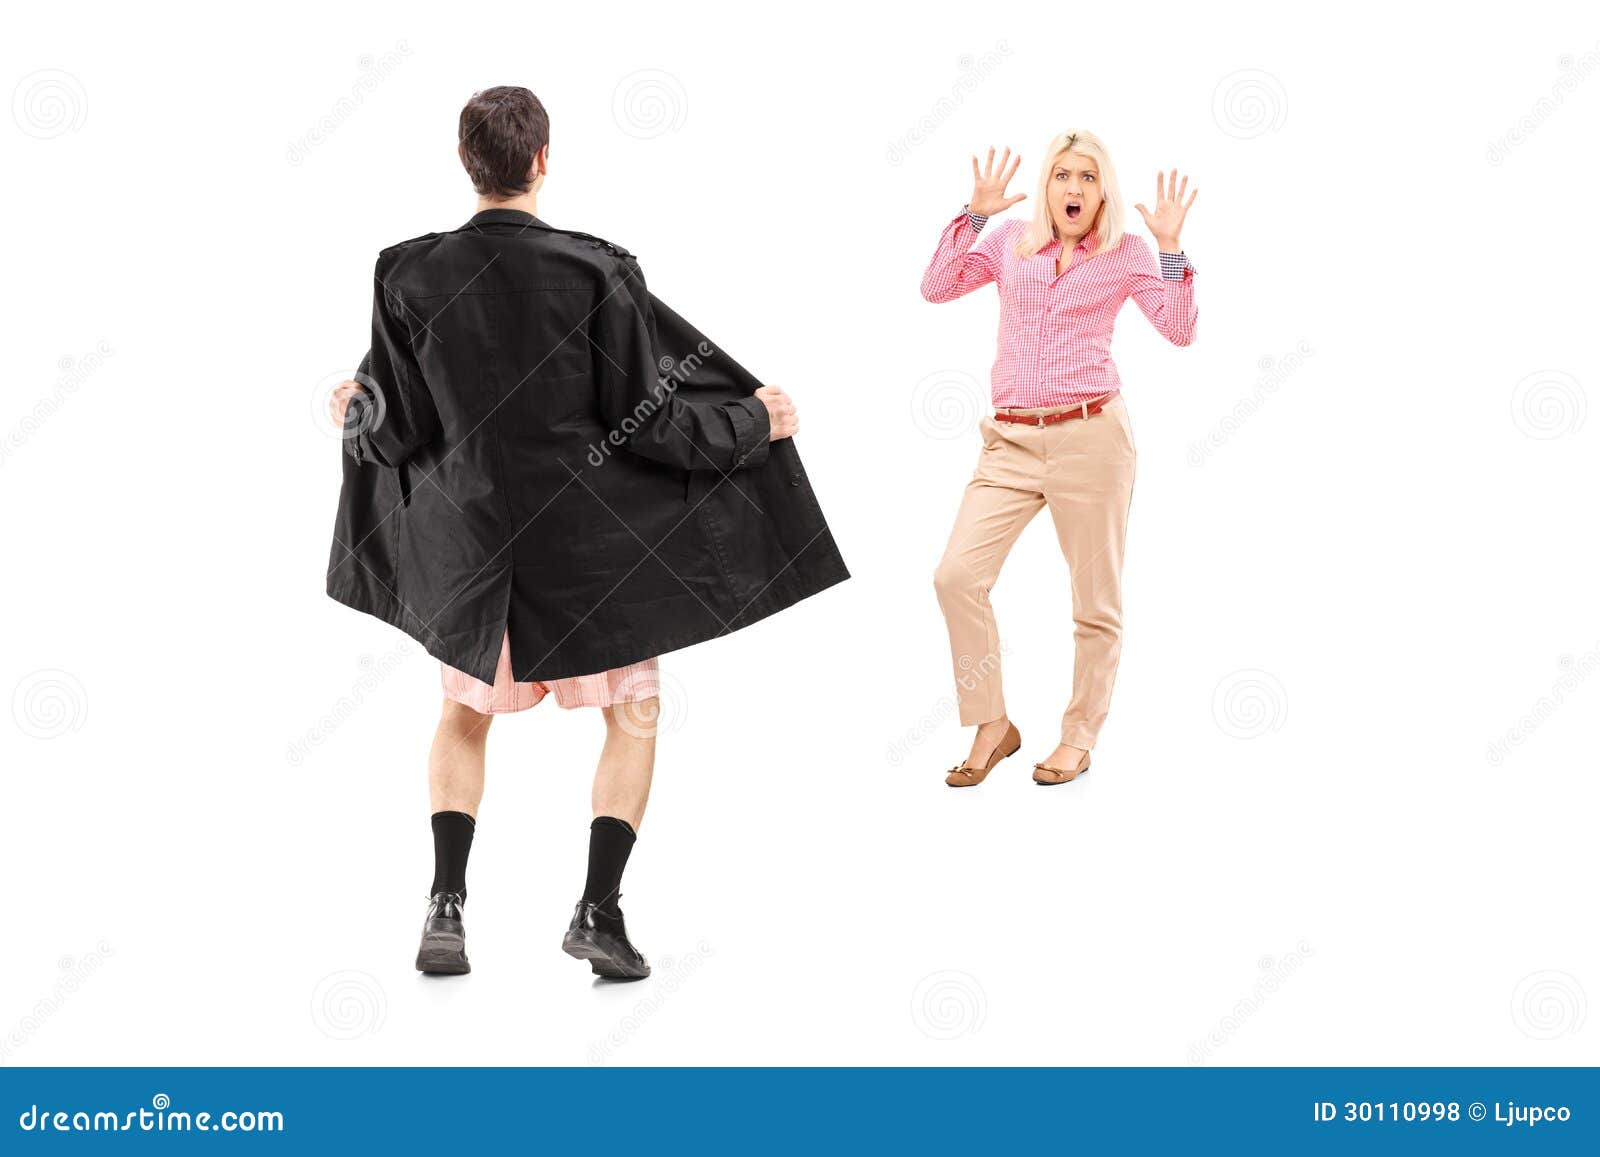 full-length-portrait-flasher-scaring-young-woman-isolated-white-background-30110998.jpg